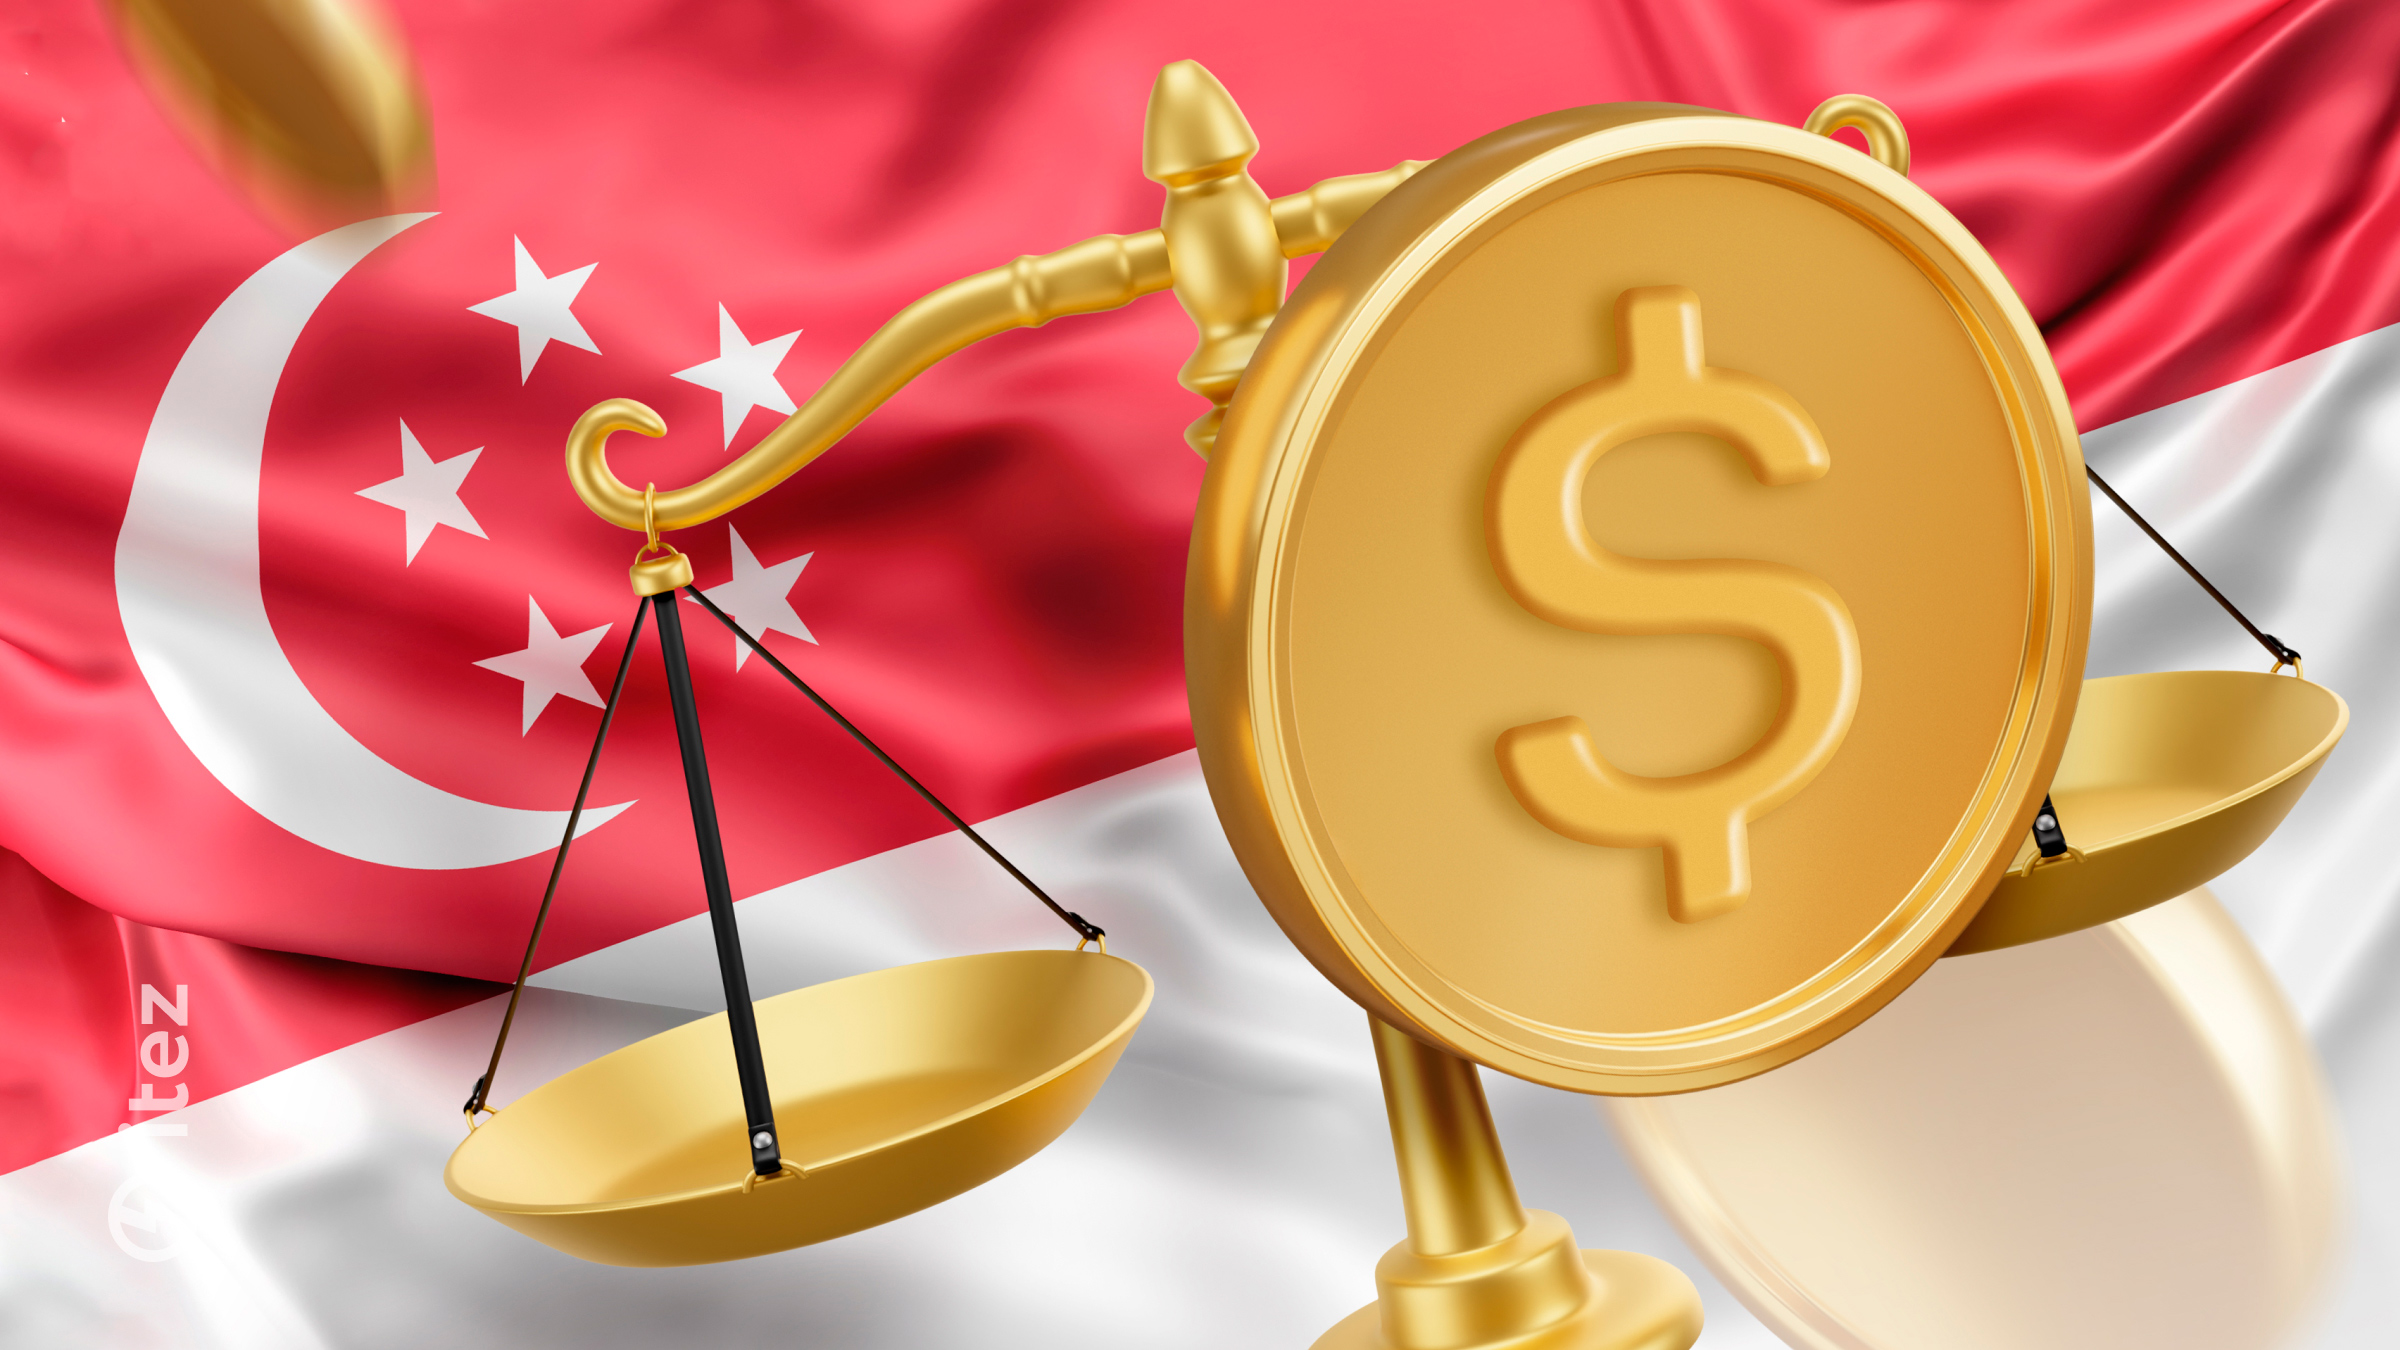 Singapore to regulate stablecoins